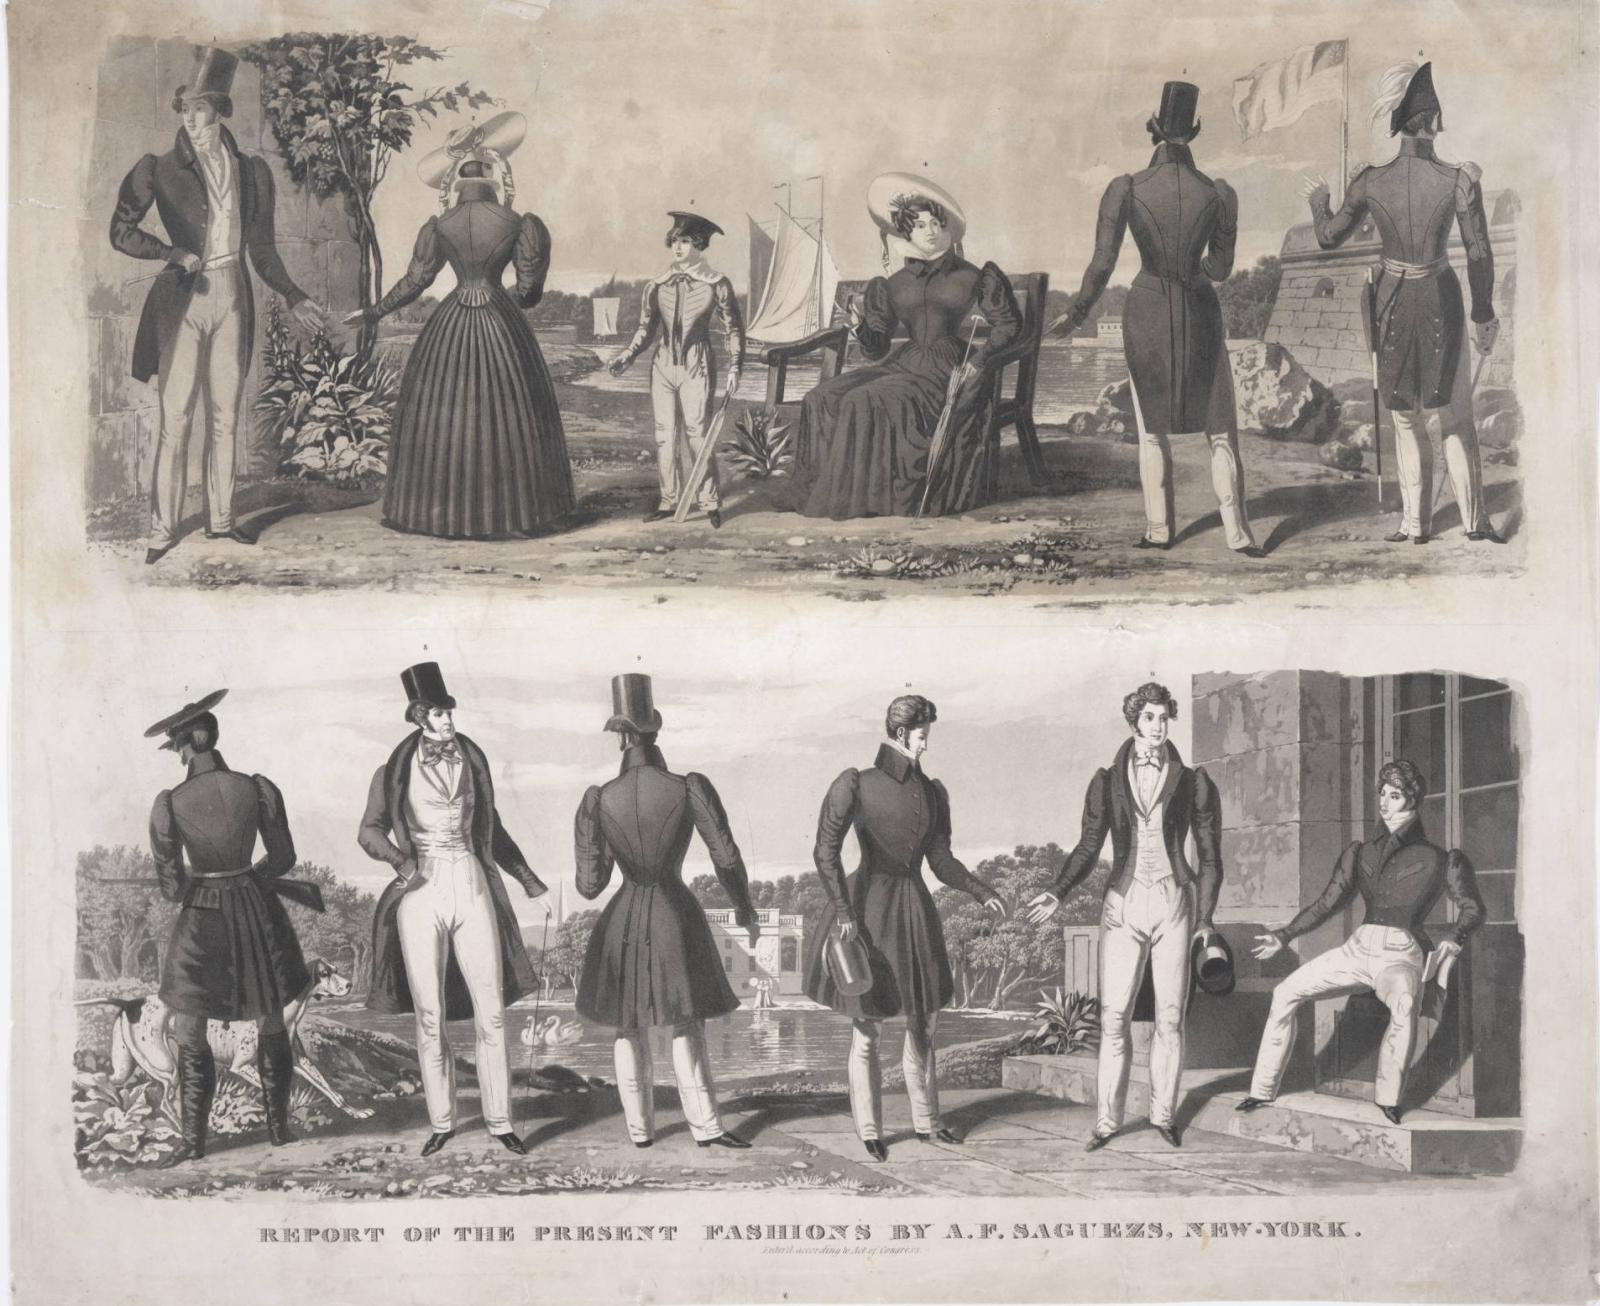 Image of two outdoor vignettes featuring primarily men, also women and a young boy in fashionable attire; title reads "Report of the present fashions by A. F. Saguezs, New-York." 